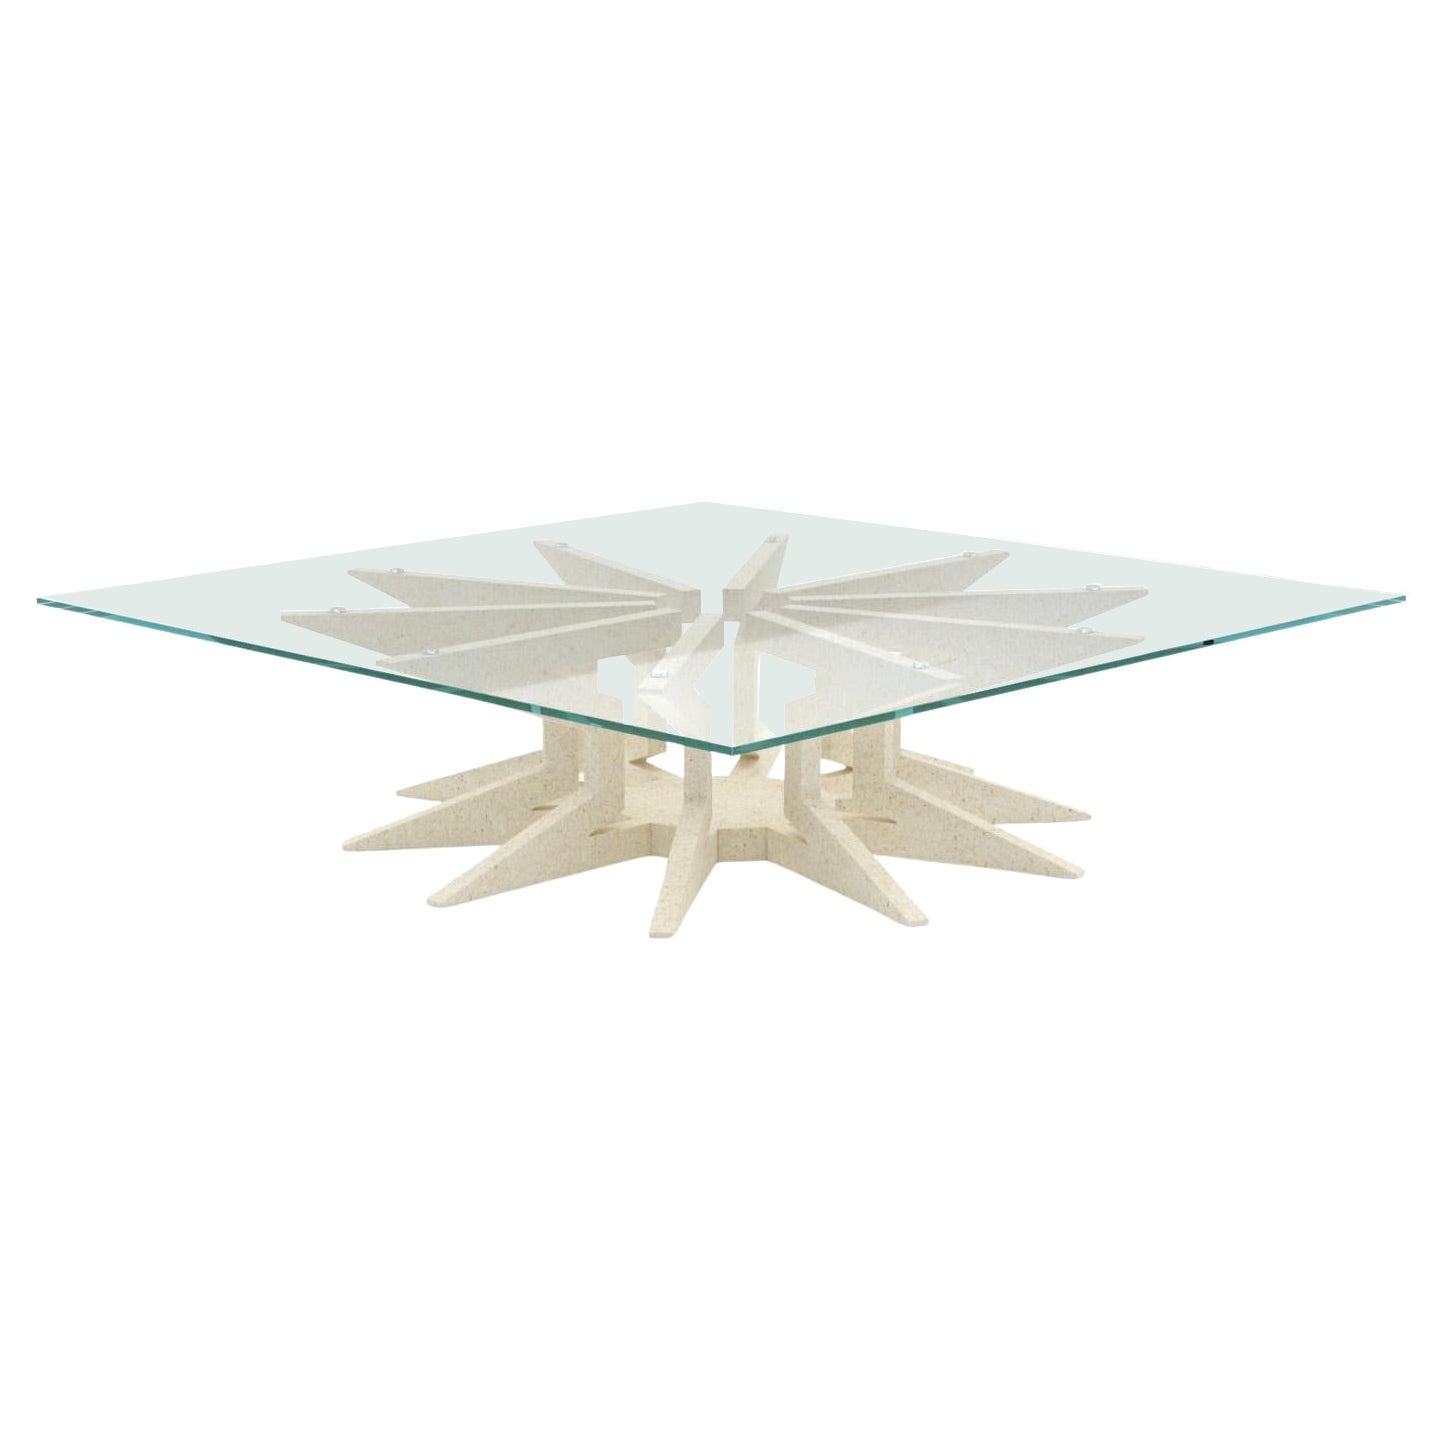 Sunshine – 21st Century Crema Marble Coffee Table by Luca Scacchetti